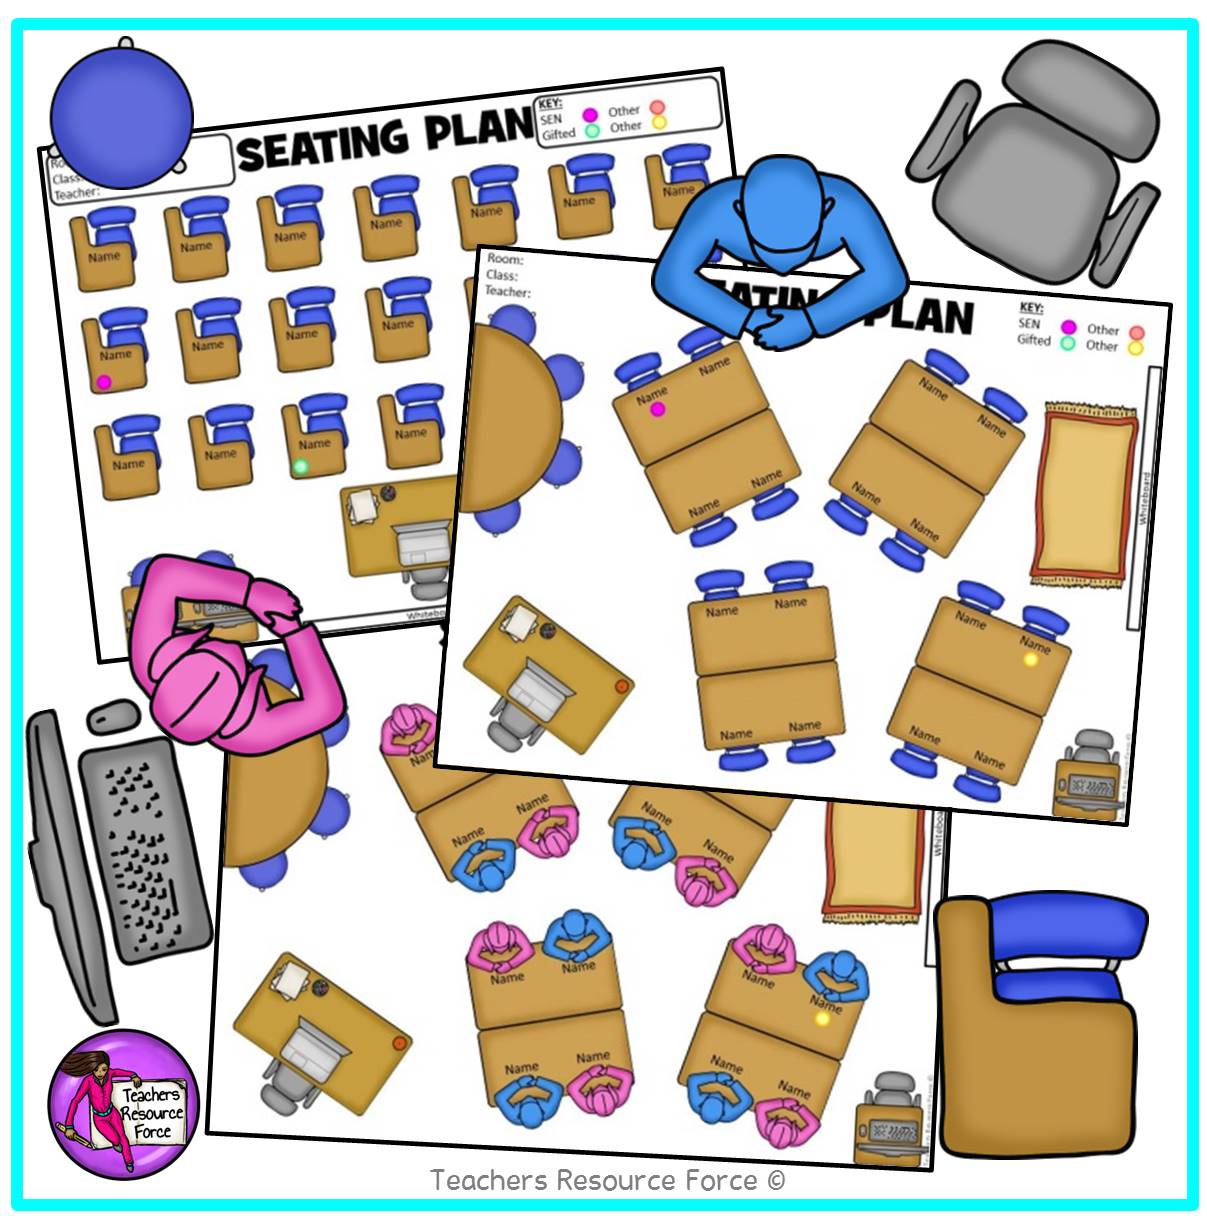 Editable Classroom Seating Chart Template Plan with Movable Images Shop trf one